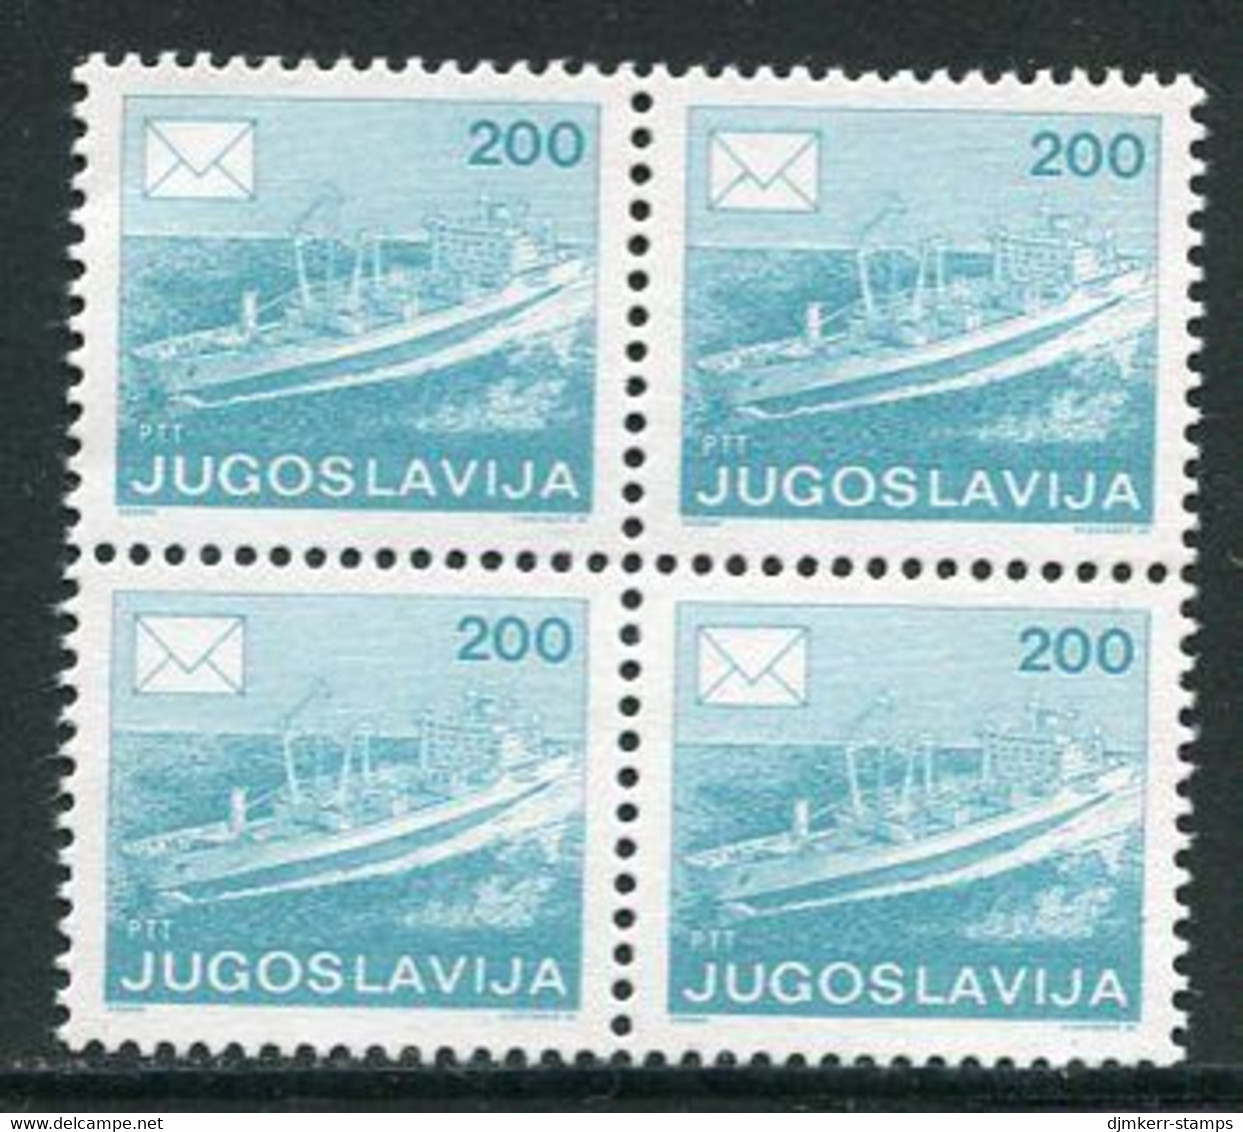 YUGOSLAVIA 1986 (1989) Postal Services Definitive 200 D. Perforated 12½ Block Of 4 MNH / **.  Michel 2176D - Unused Stamps